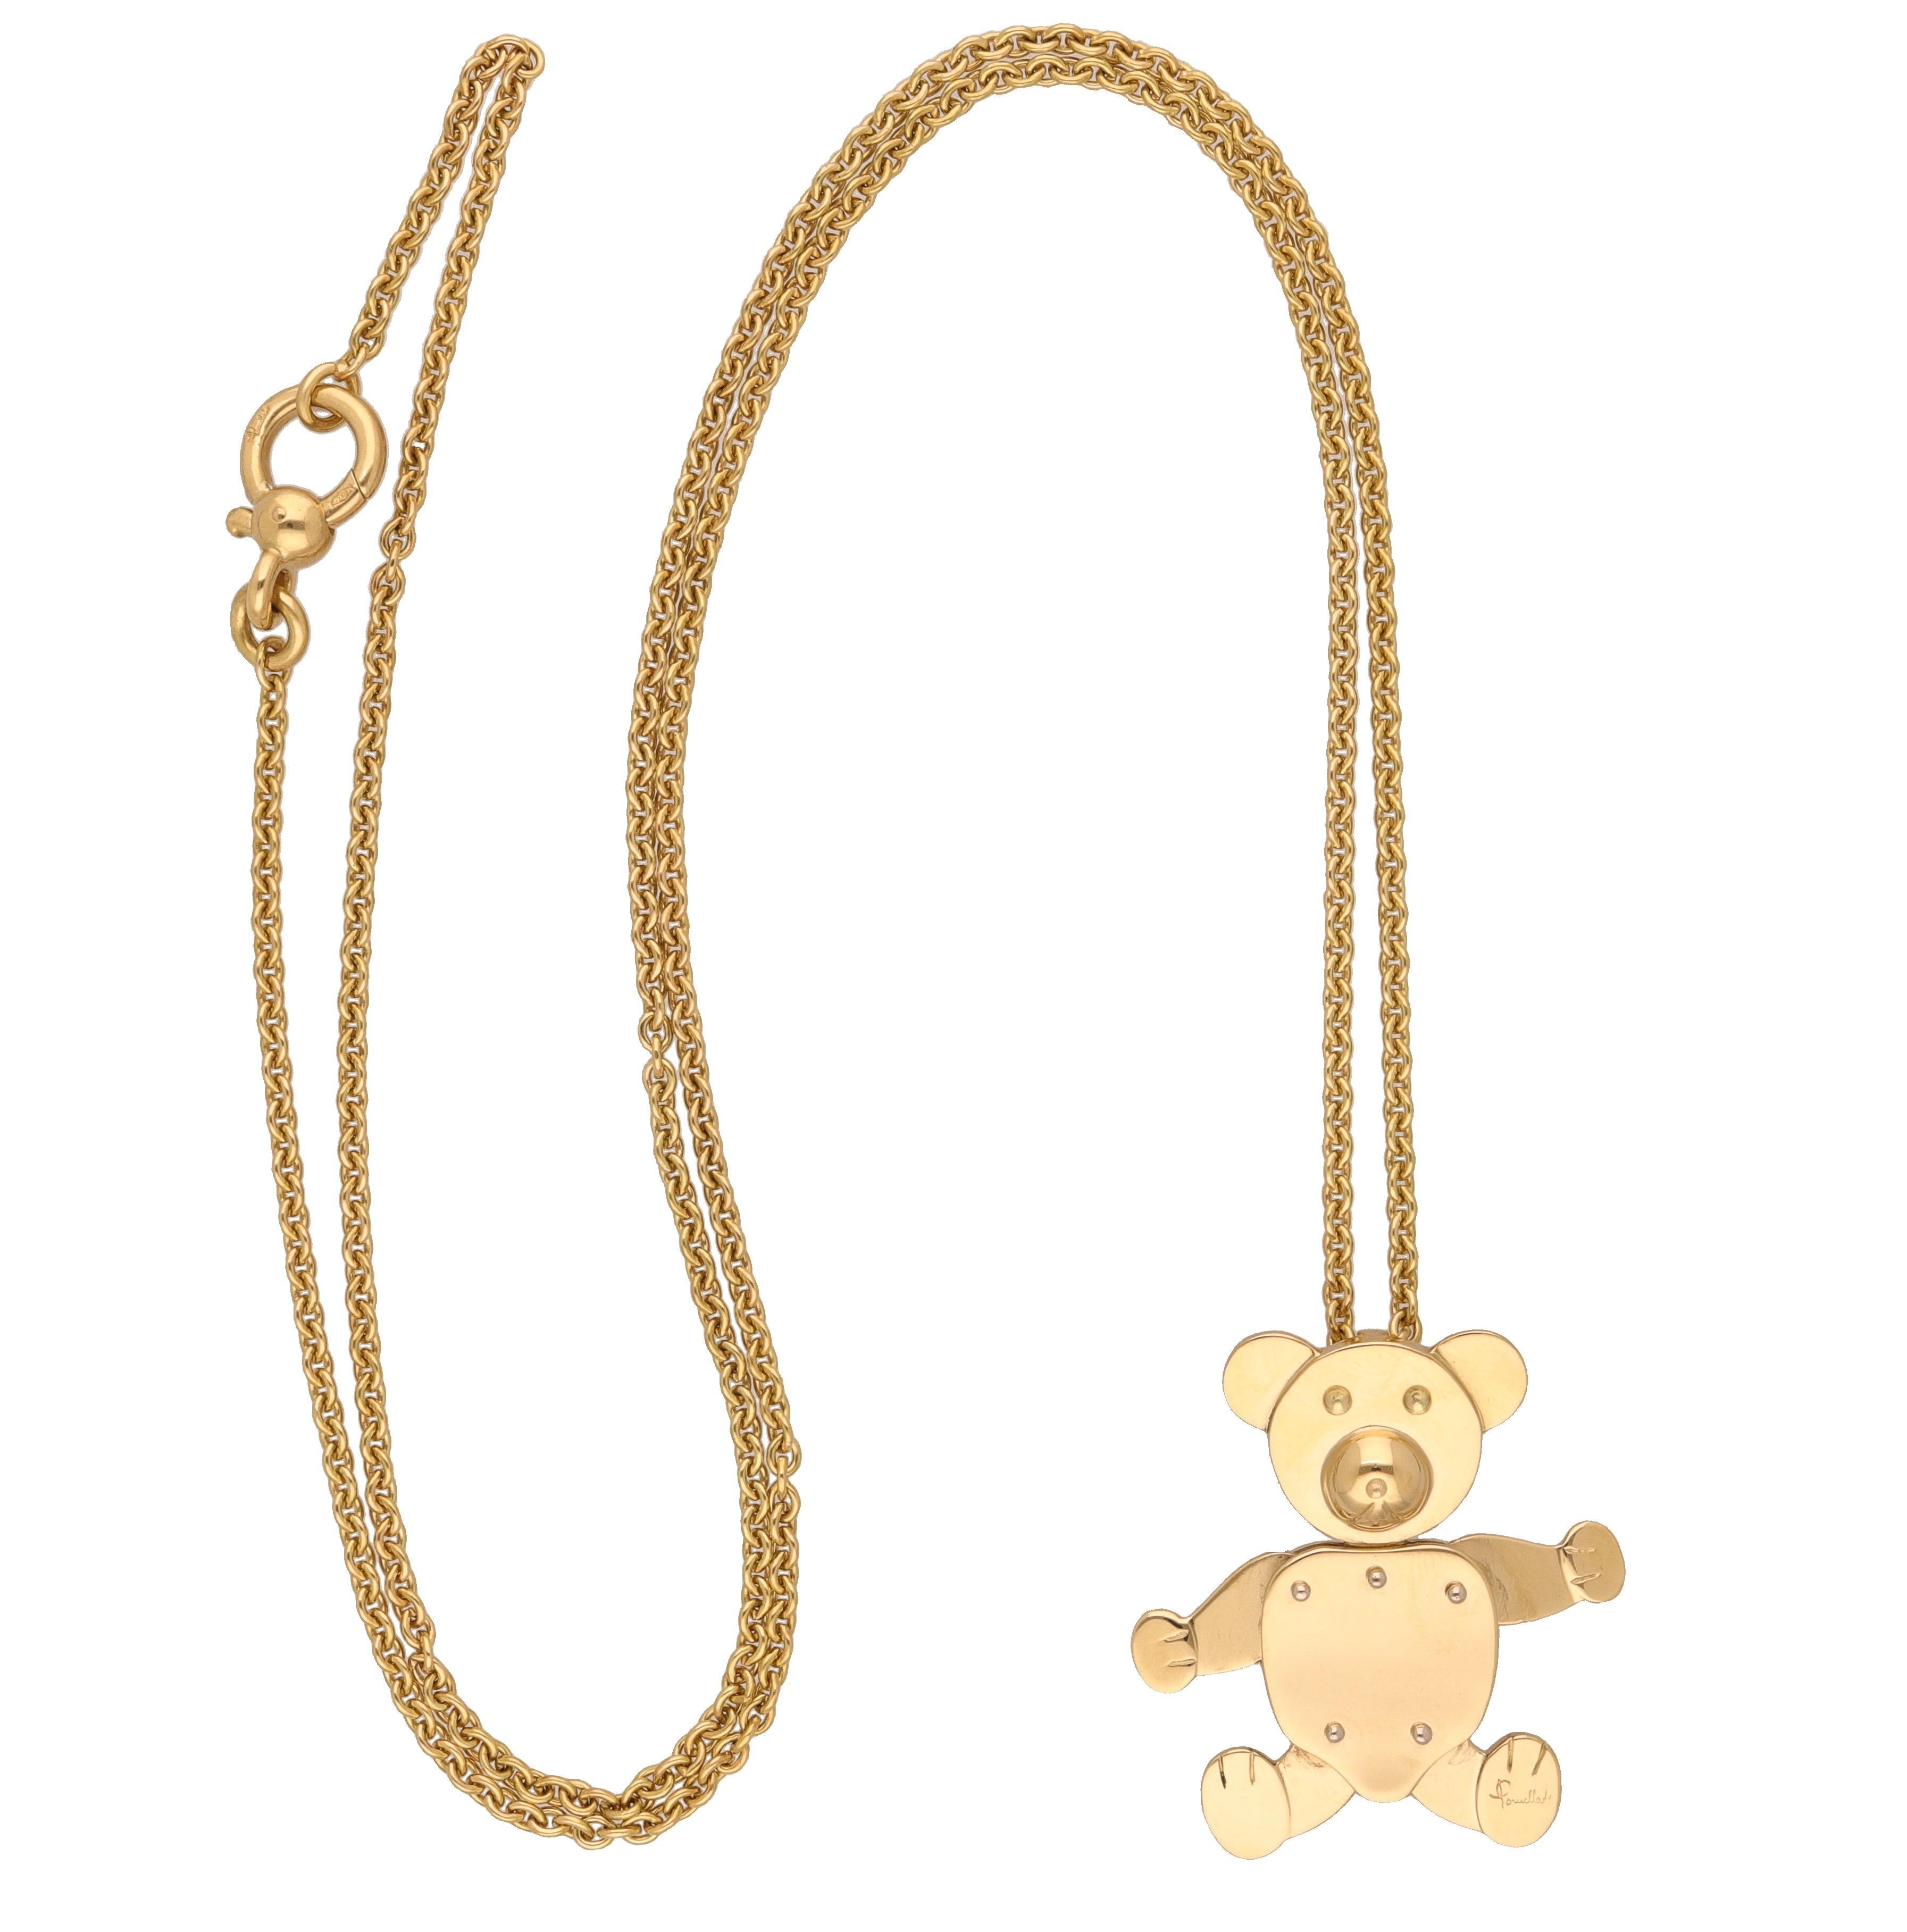 18 karat yellow gold necklace signed by Pomellato.
This iconic charm necklace is hand-made in Italy. 
2000 ca.
The charm is detachable and is designed as a teddy bear.
Necklace length cm. 80
Charm length cm. 4.00
Weight gr. 42.50